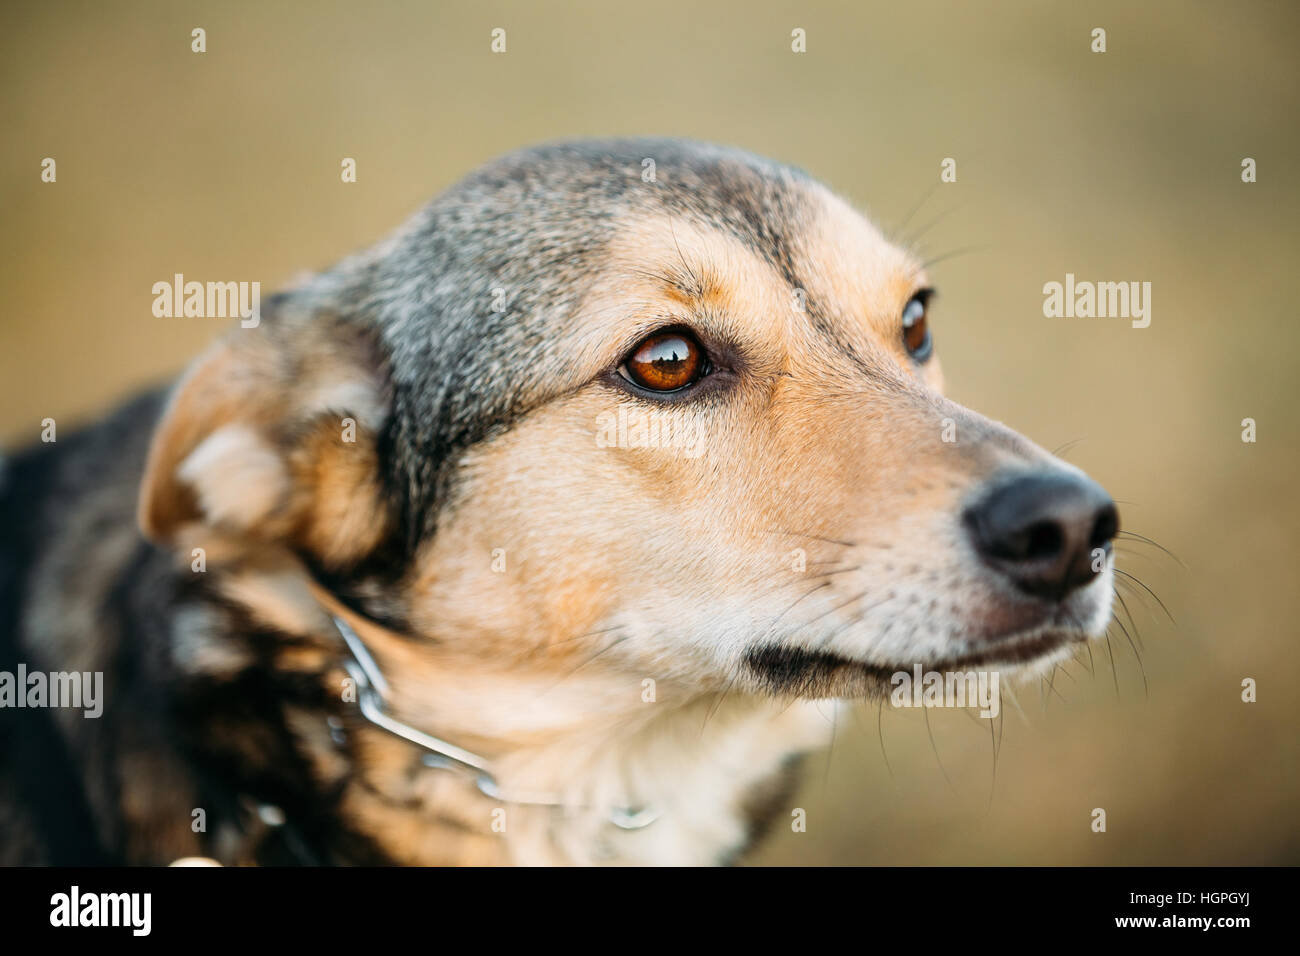 Brown Dog Head Close Up Portrait. Clever Dog Stock Photo